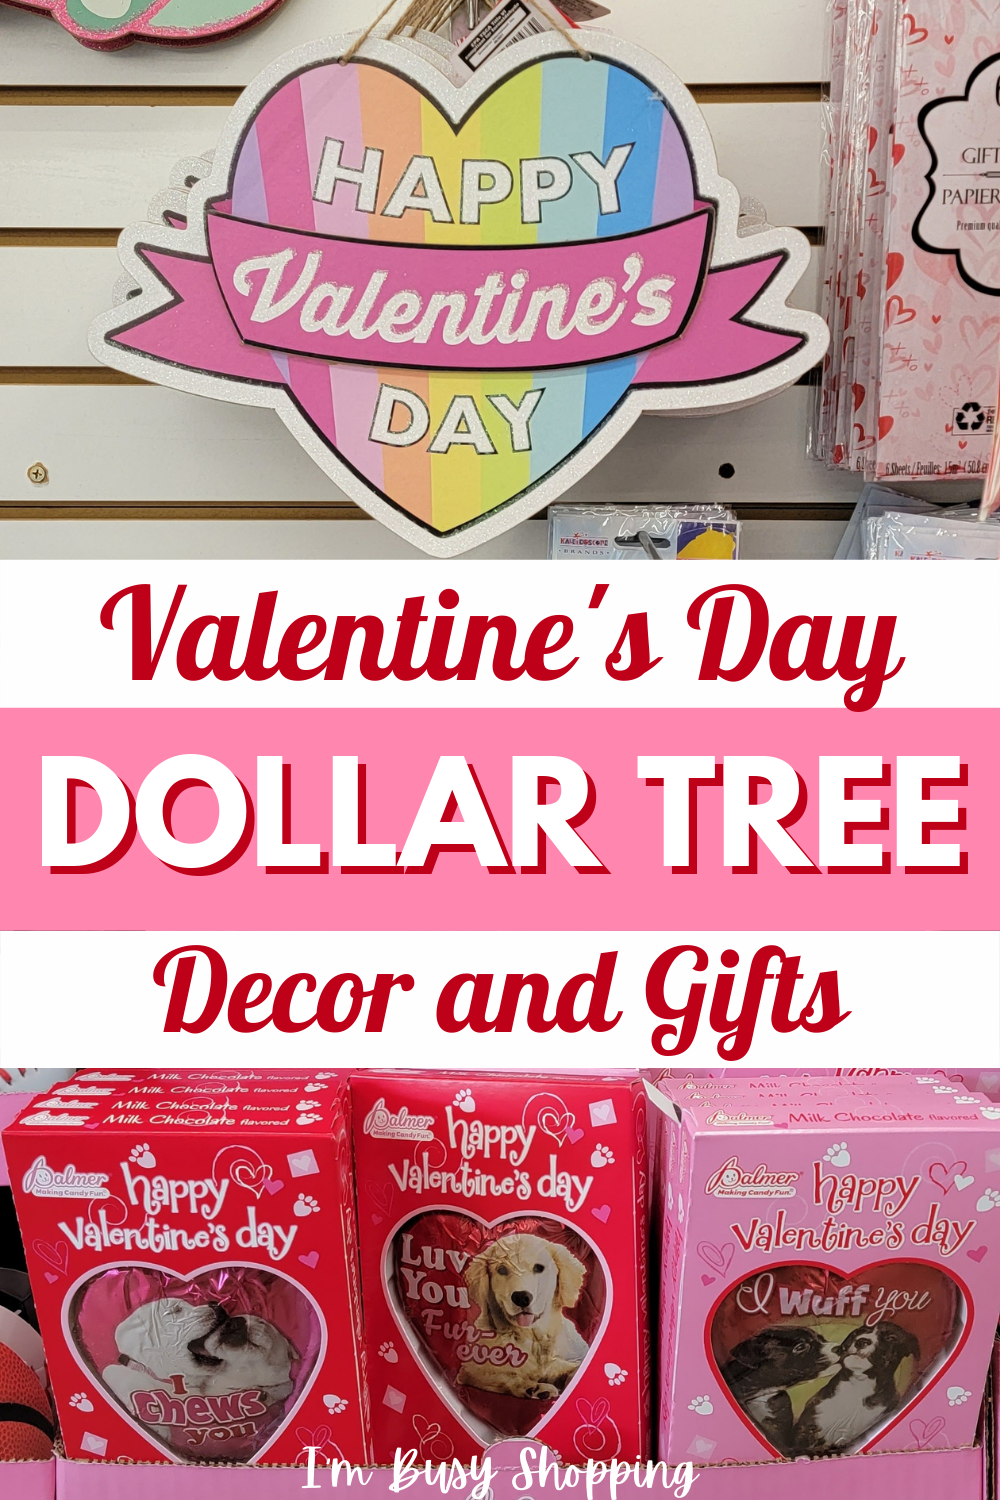 Pin showing Valentine's Day Dollar Tree Decor and Gifts